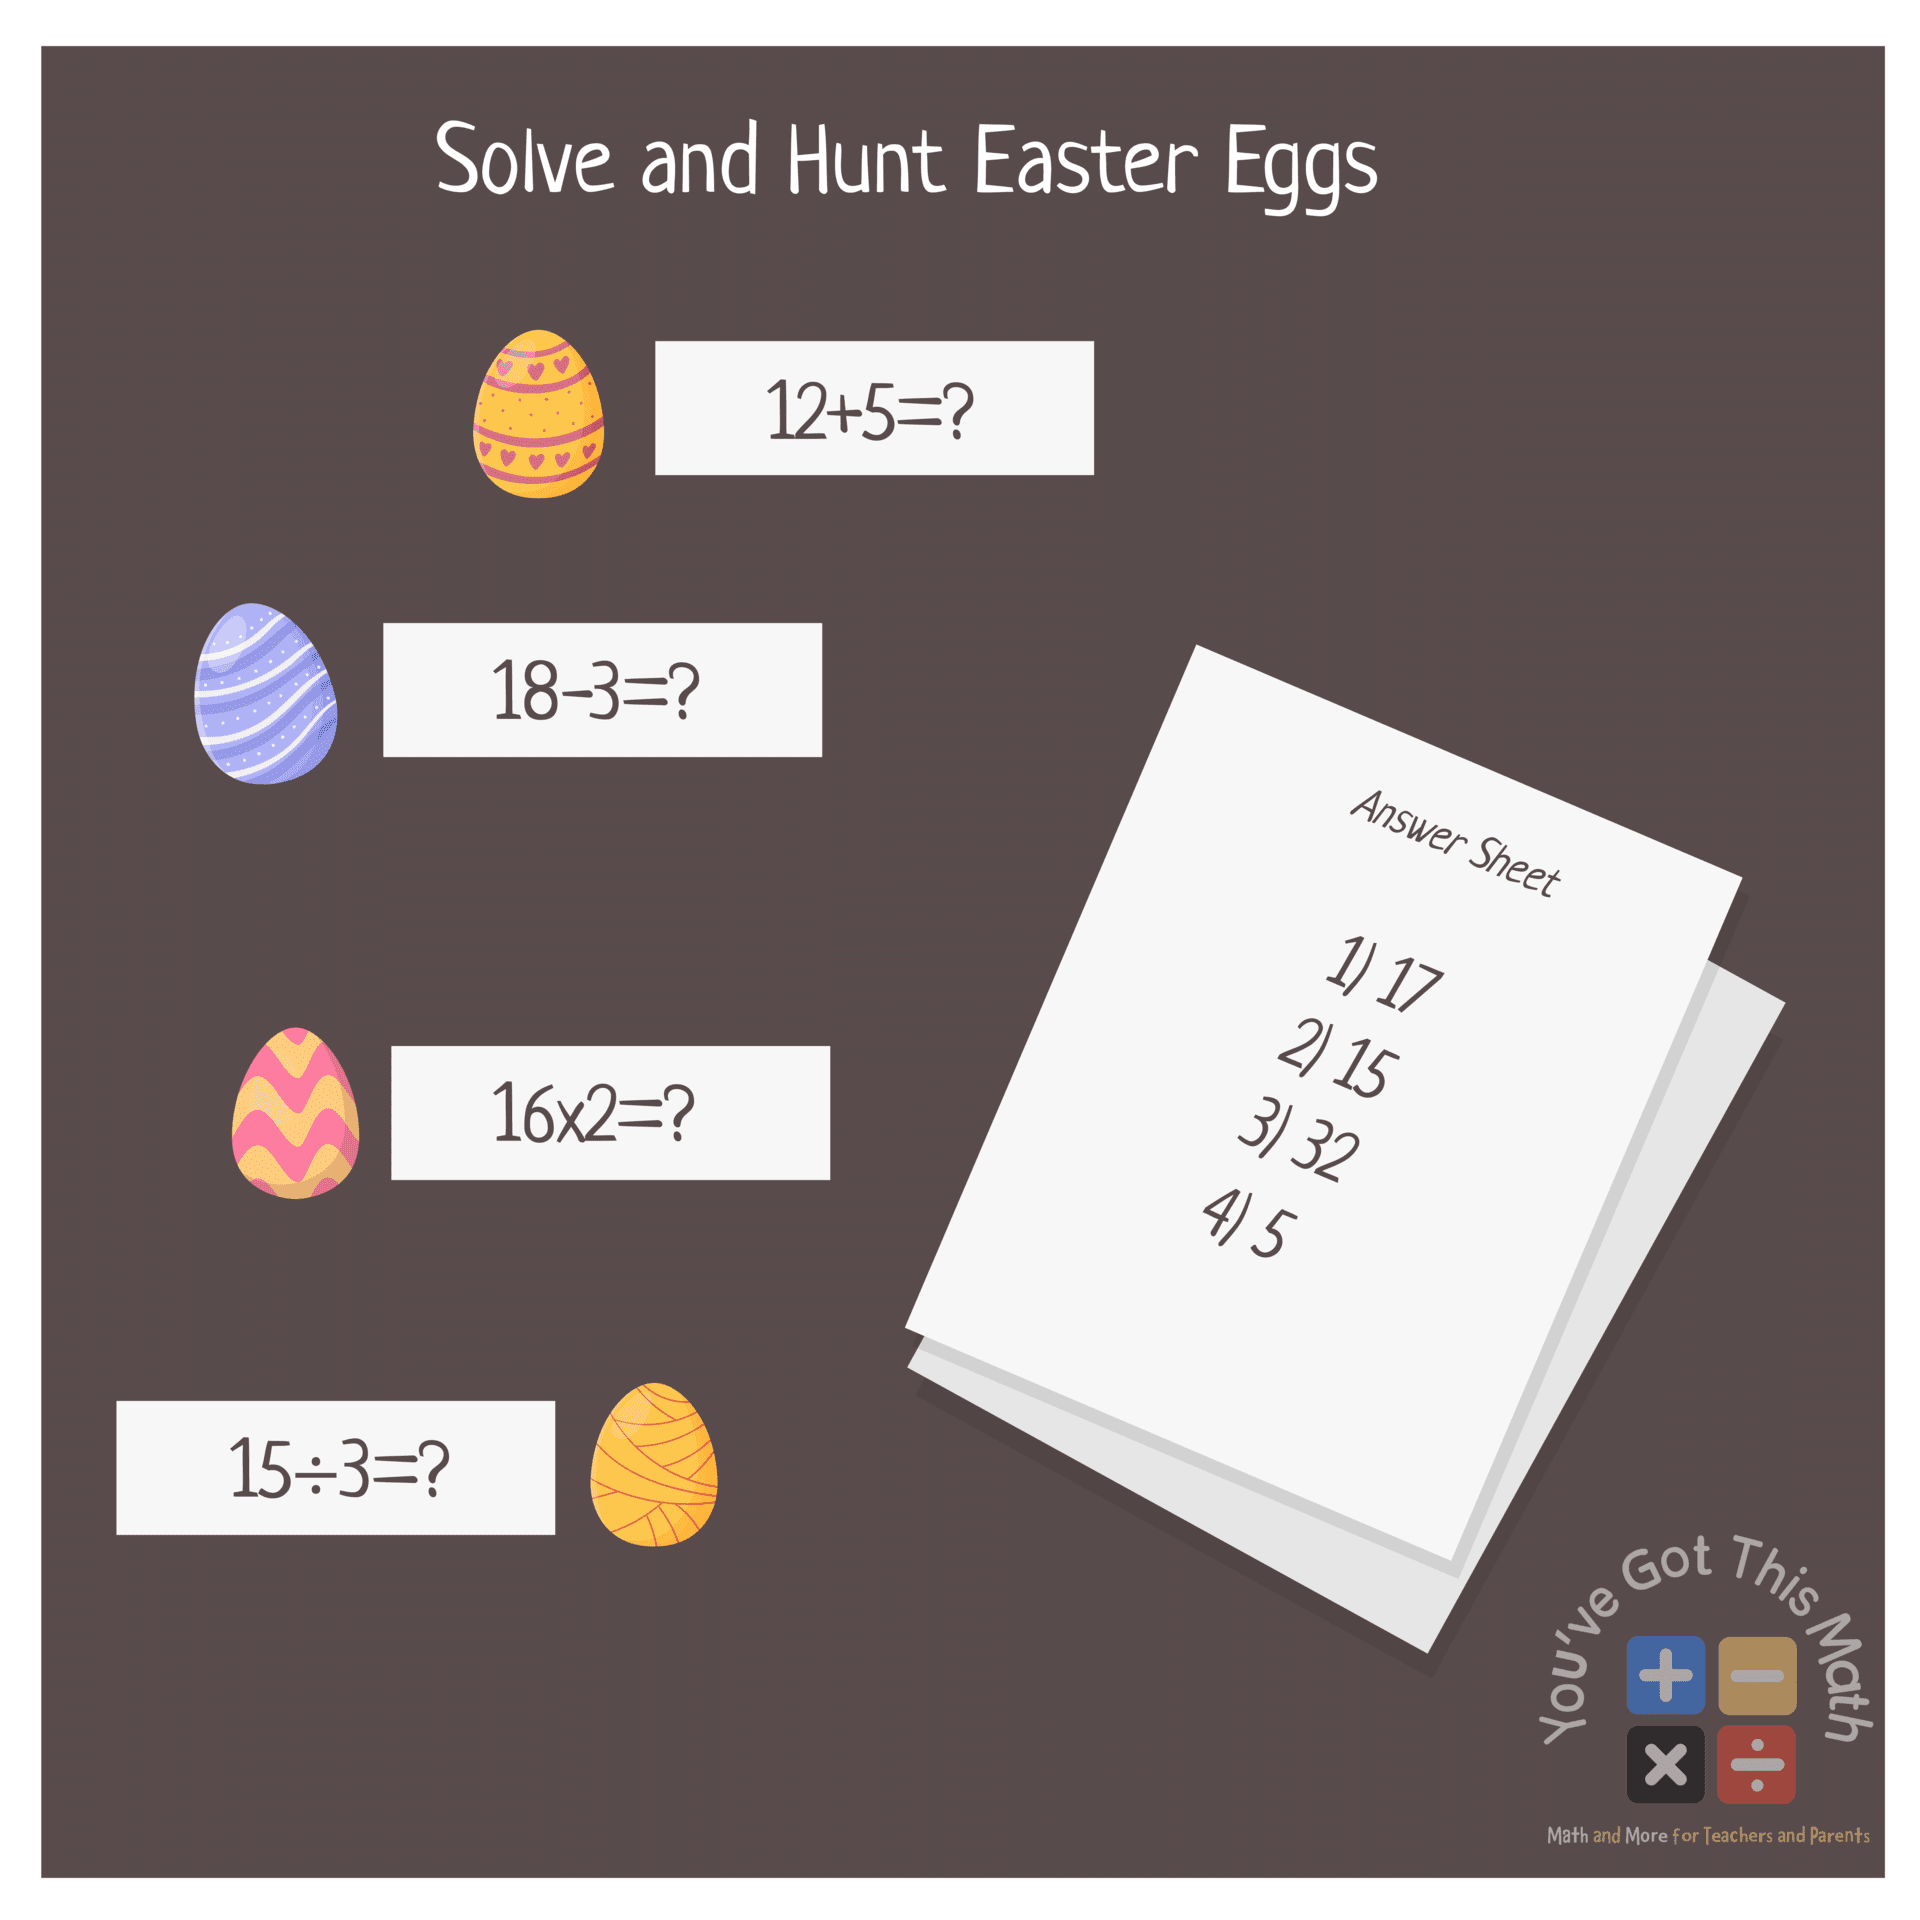 Solve and Hunt Easter Eggs!